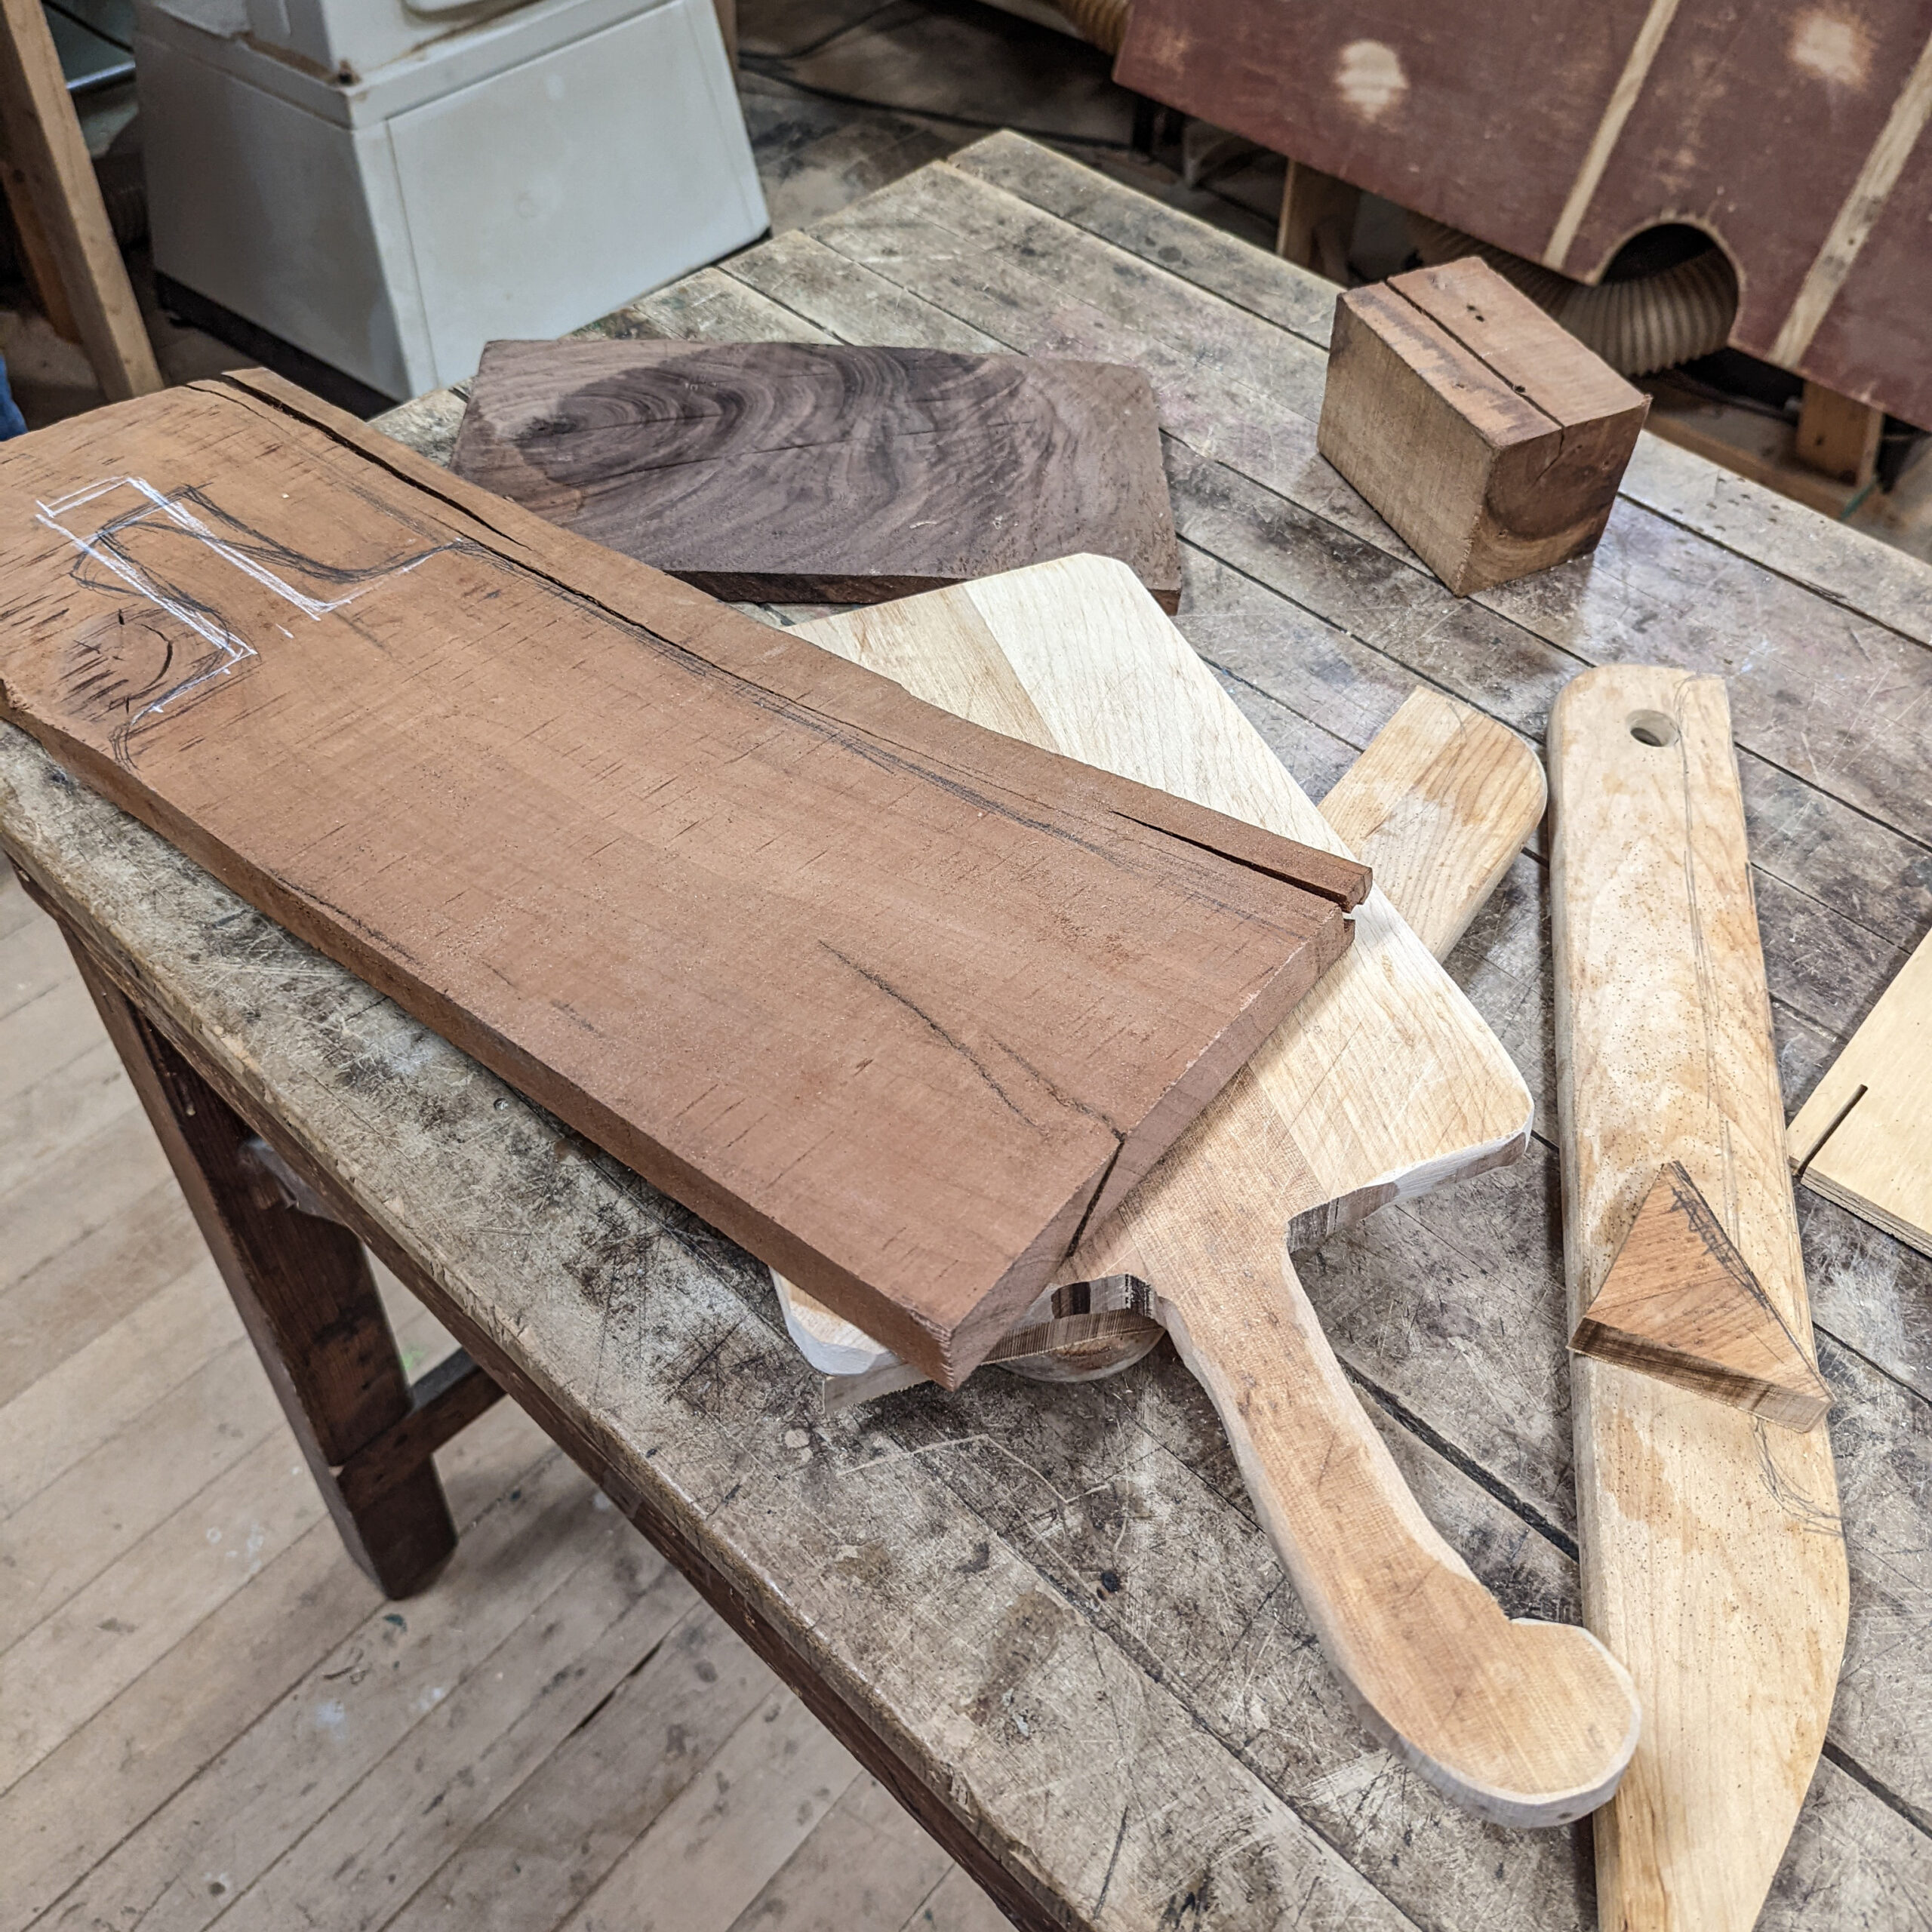 DIY decorative cutting boards in production in a community woodshop.